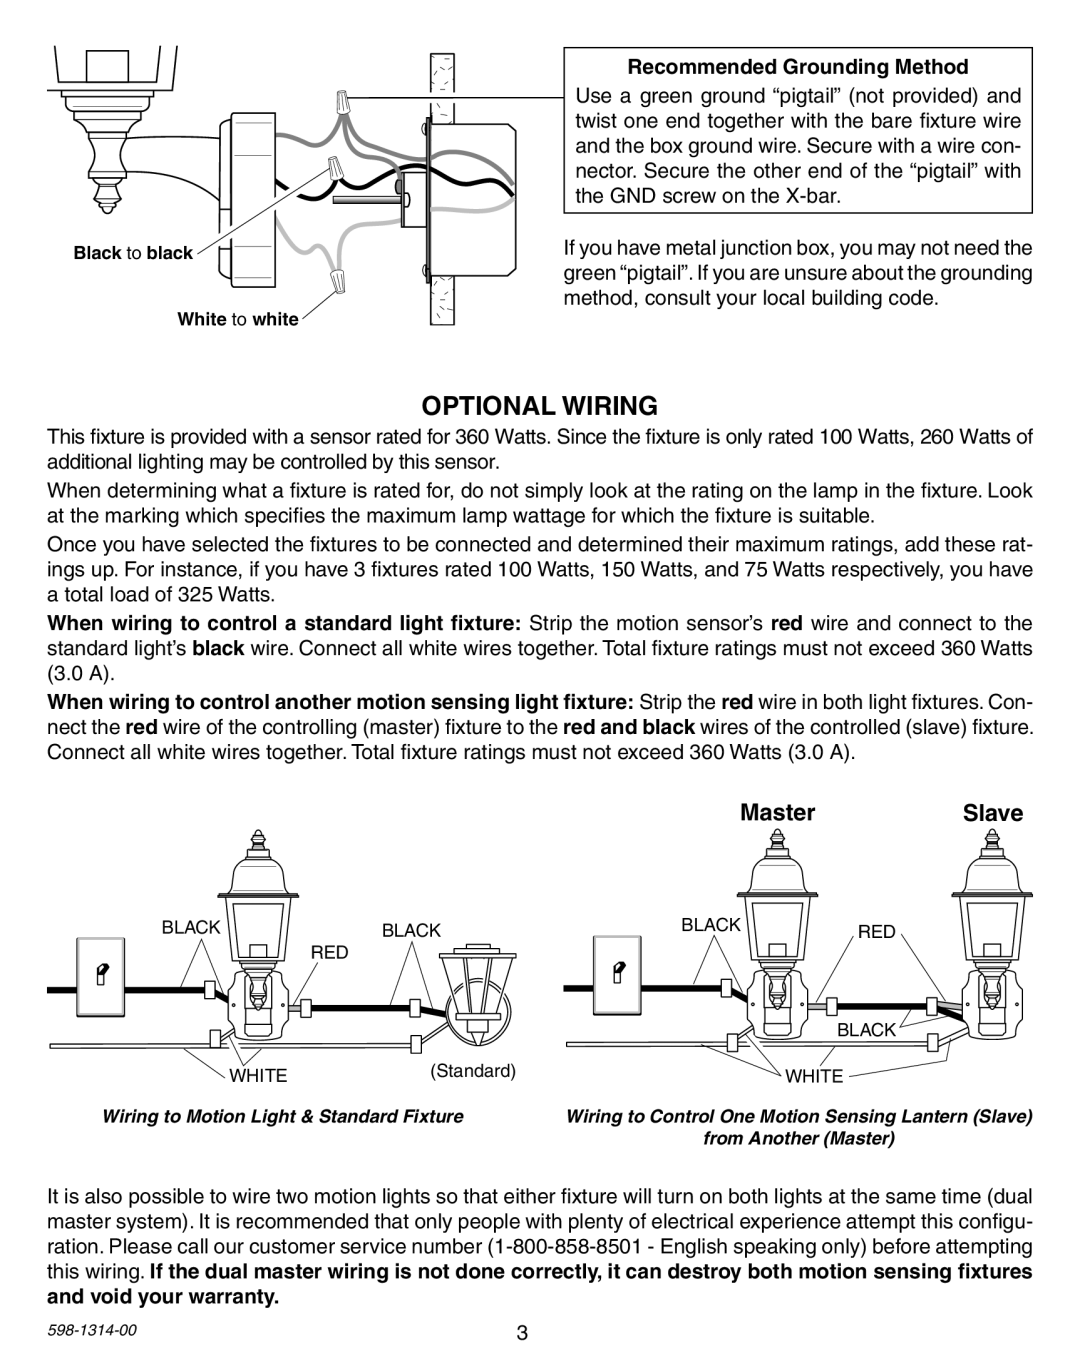 Heath Zenith 5598 owner manual Optional Wiring, MasterSlave, Recommended Grounding Method 